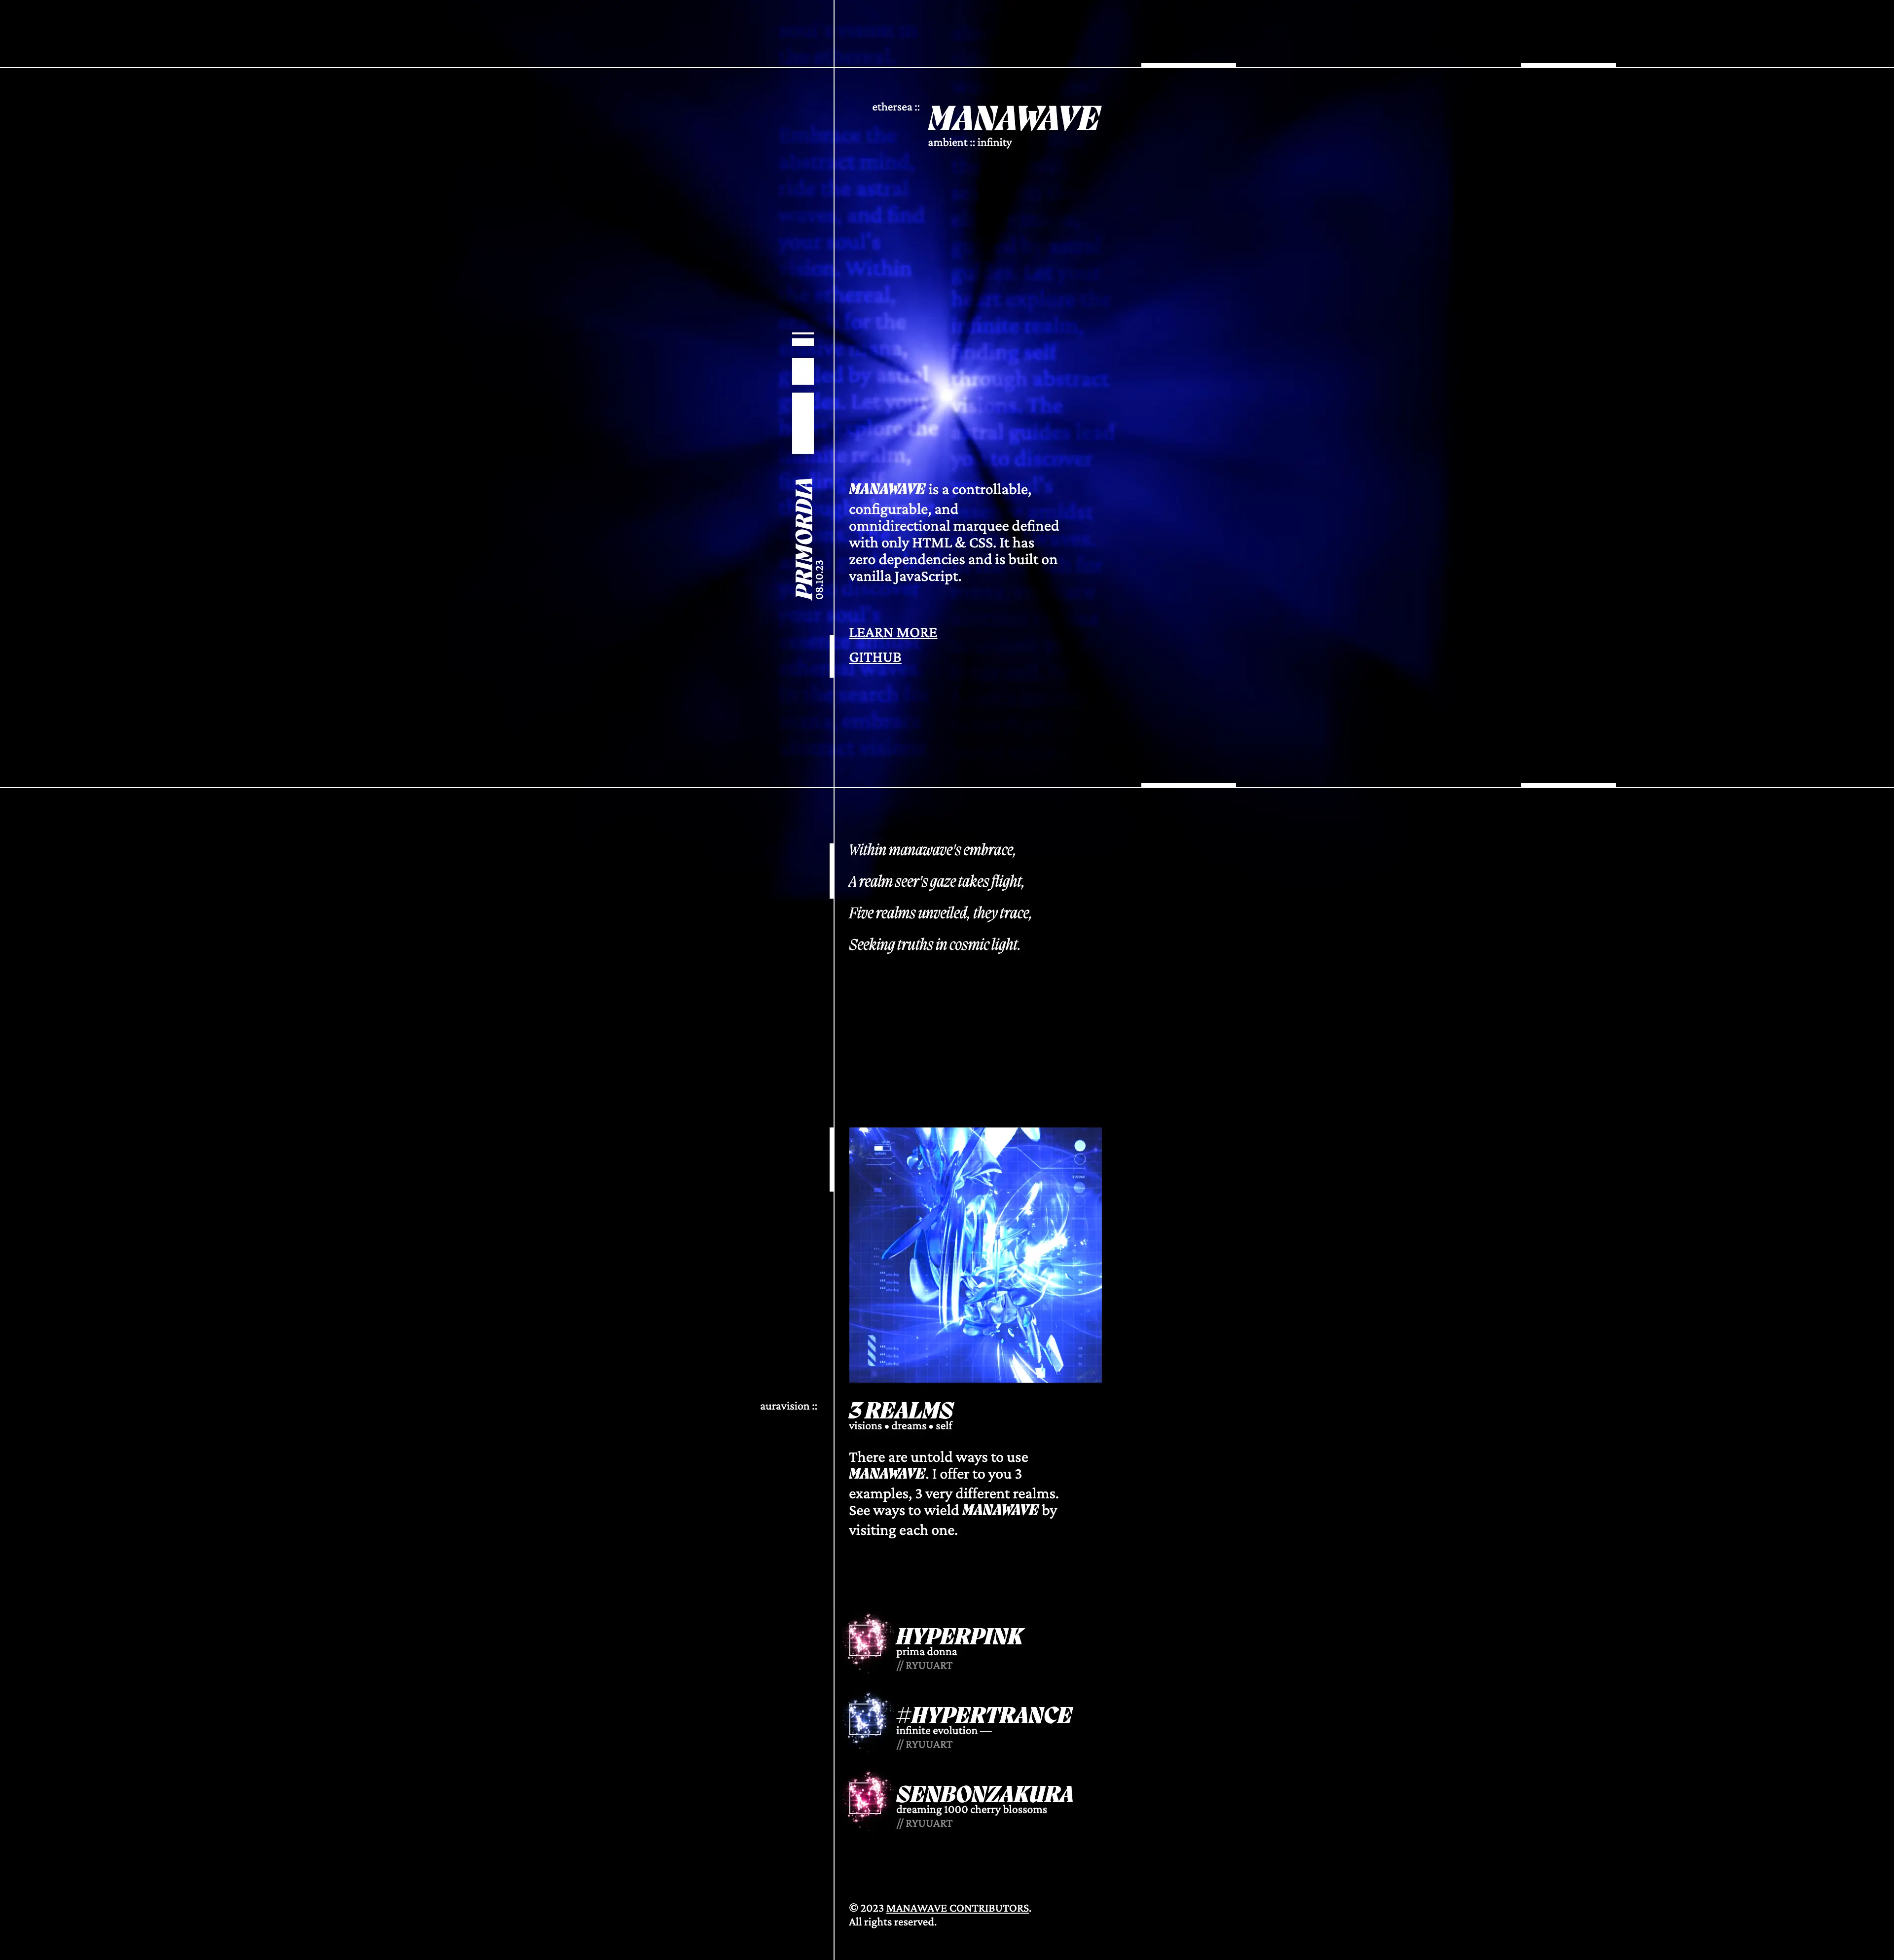 MANAWAVE desktop home page showing a bright foggy blue star on top and links on the bottom. Contains futuristic accents, poetry, and sparkles.